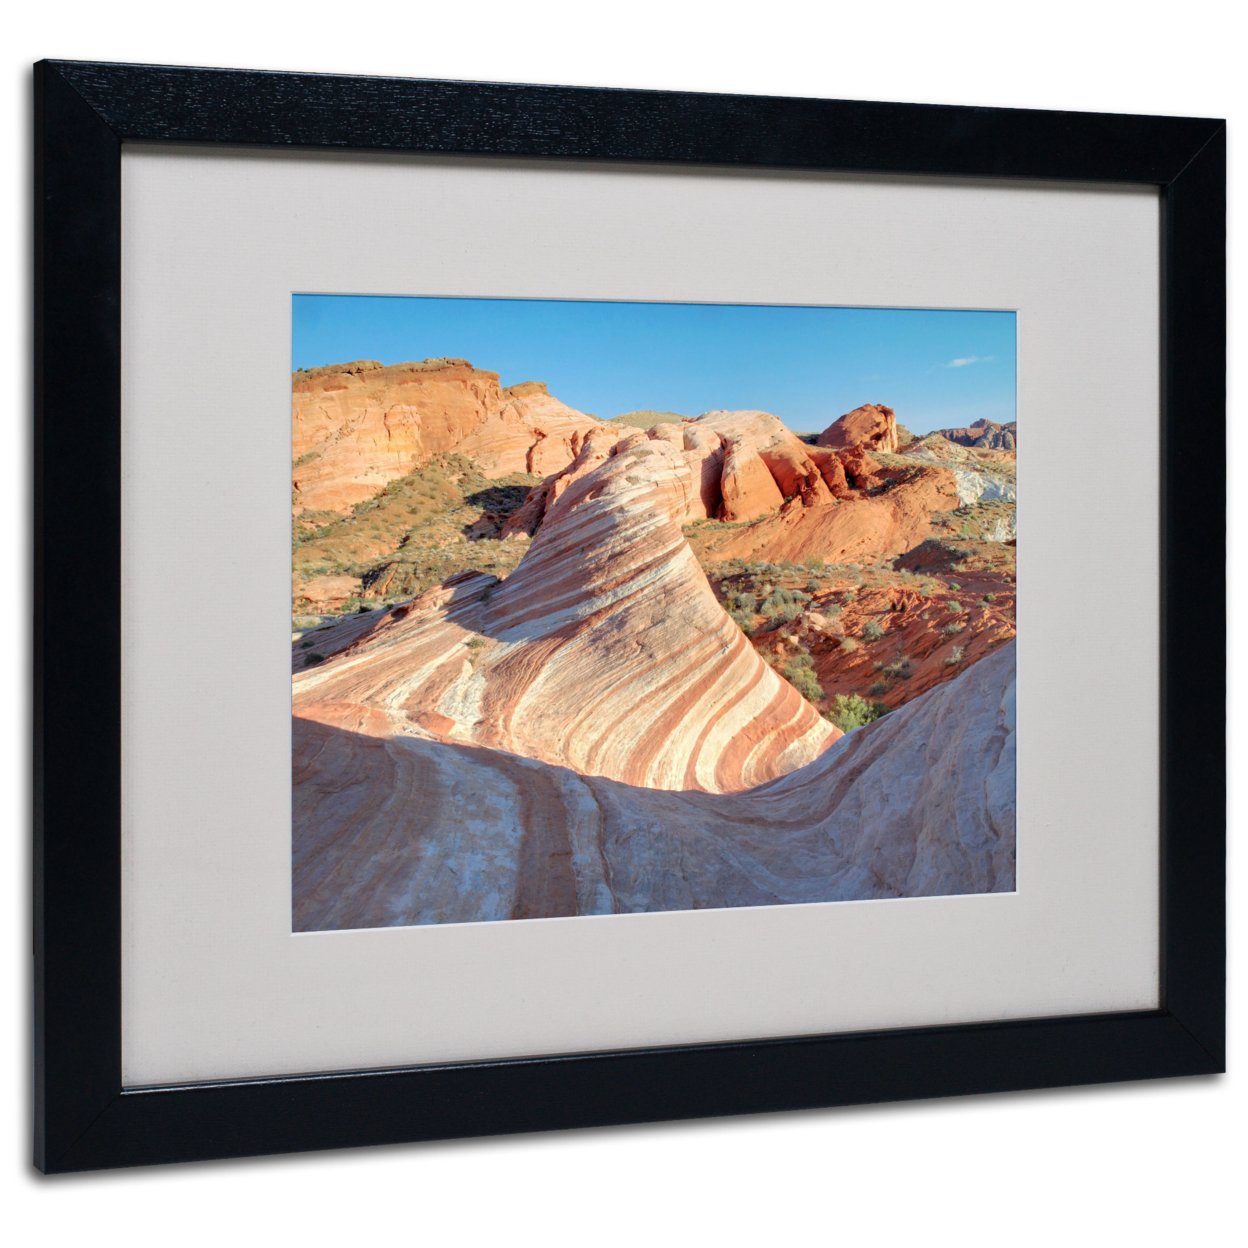 Pierre Leclerc 'Valley Of Fire Wave' Black Wooden Framed Art 18 X 22 Inches